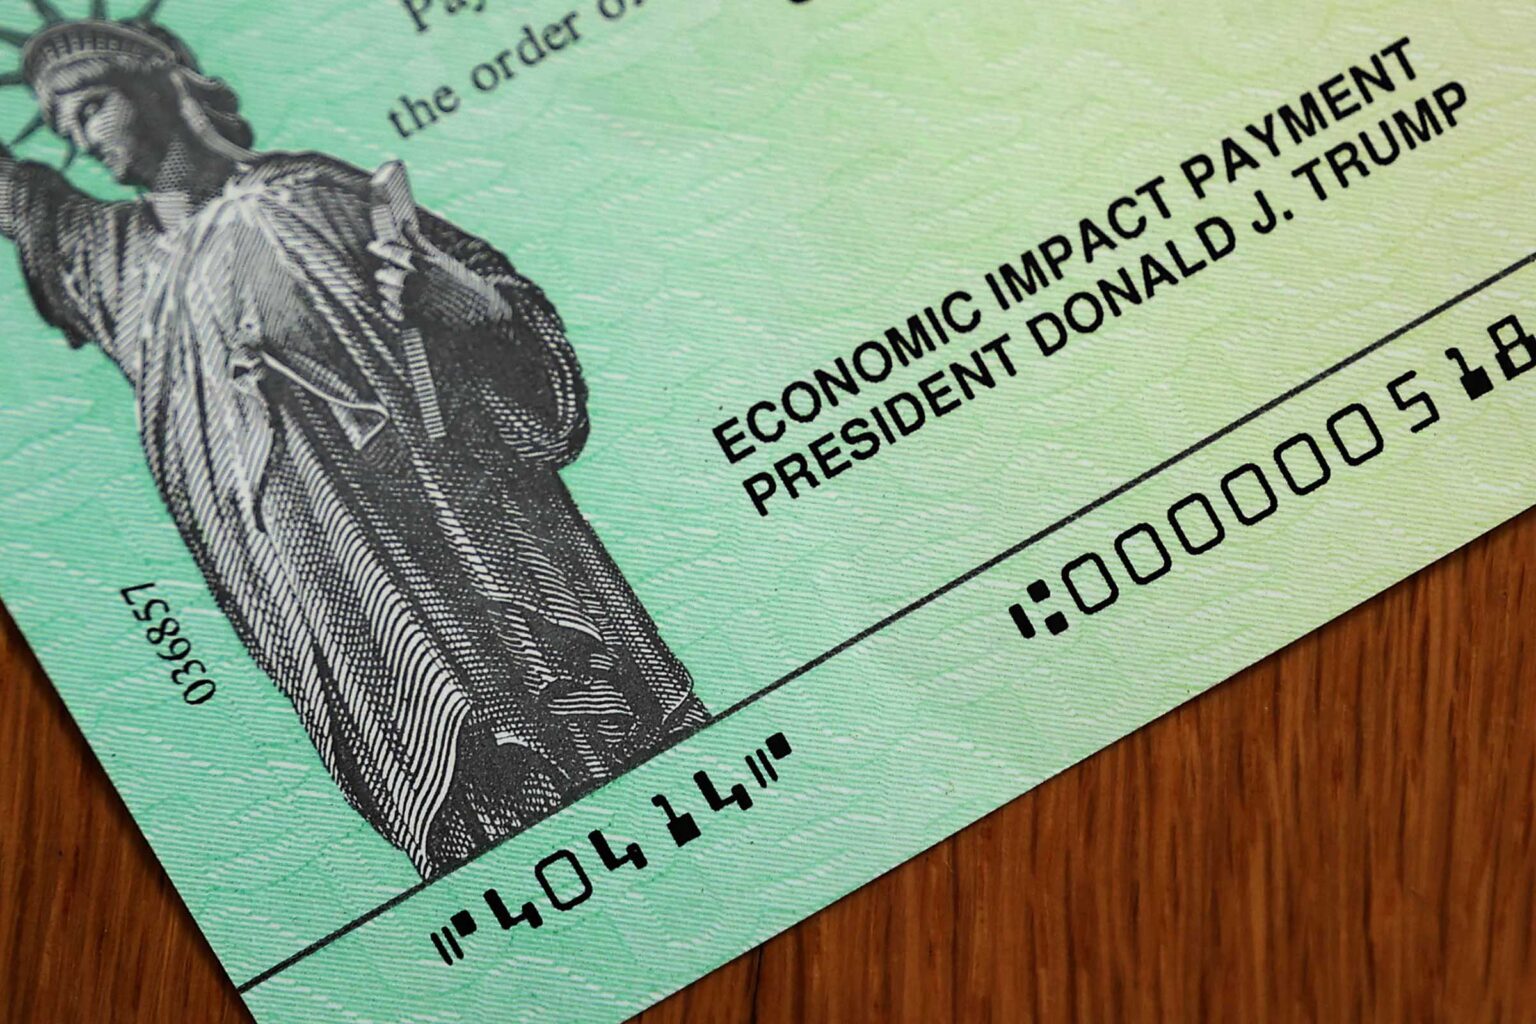 The second stimulus checks are being sent out, but not for the amount President Donald Trump and other want. Find out why Americans are only getting $600.